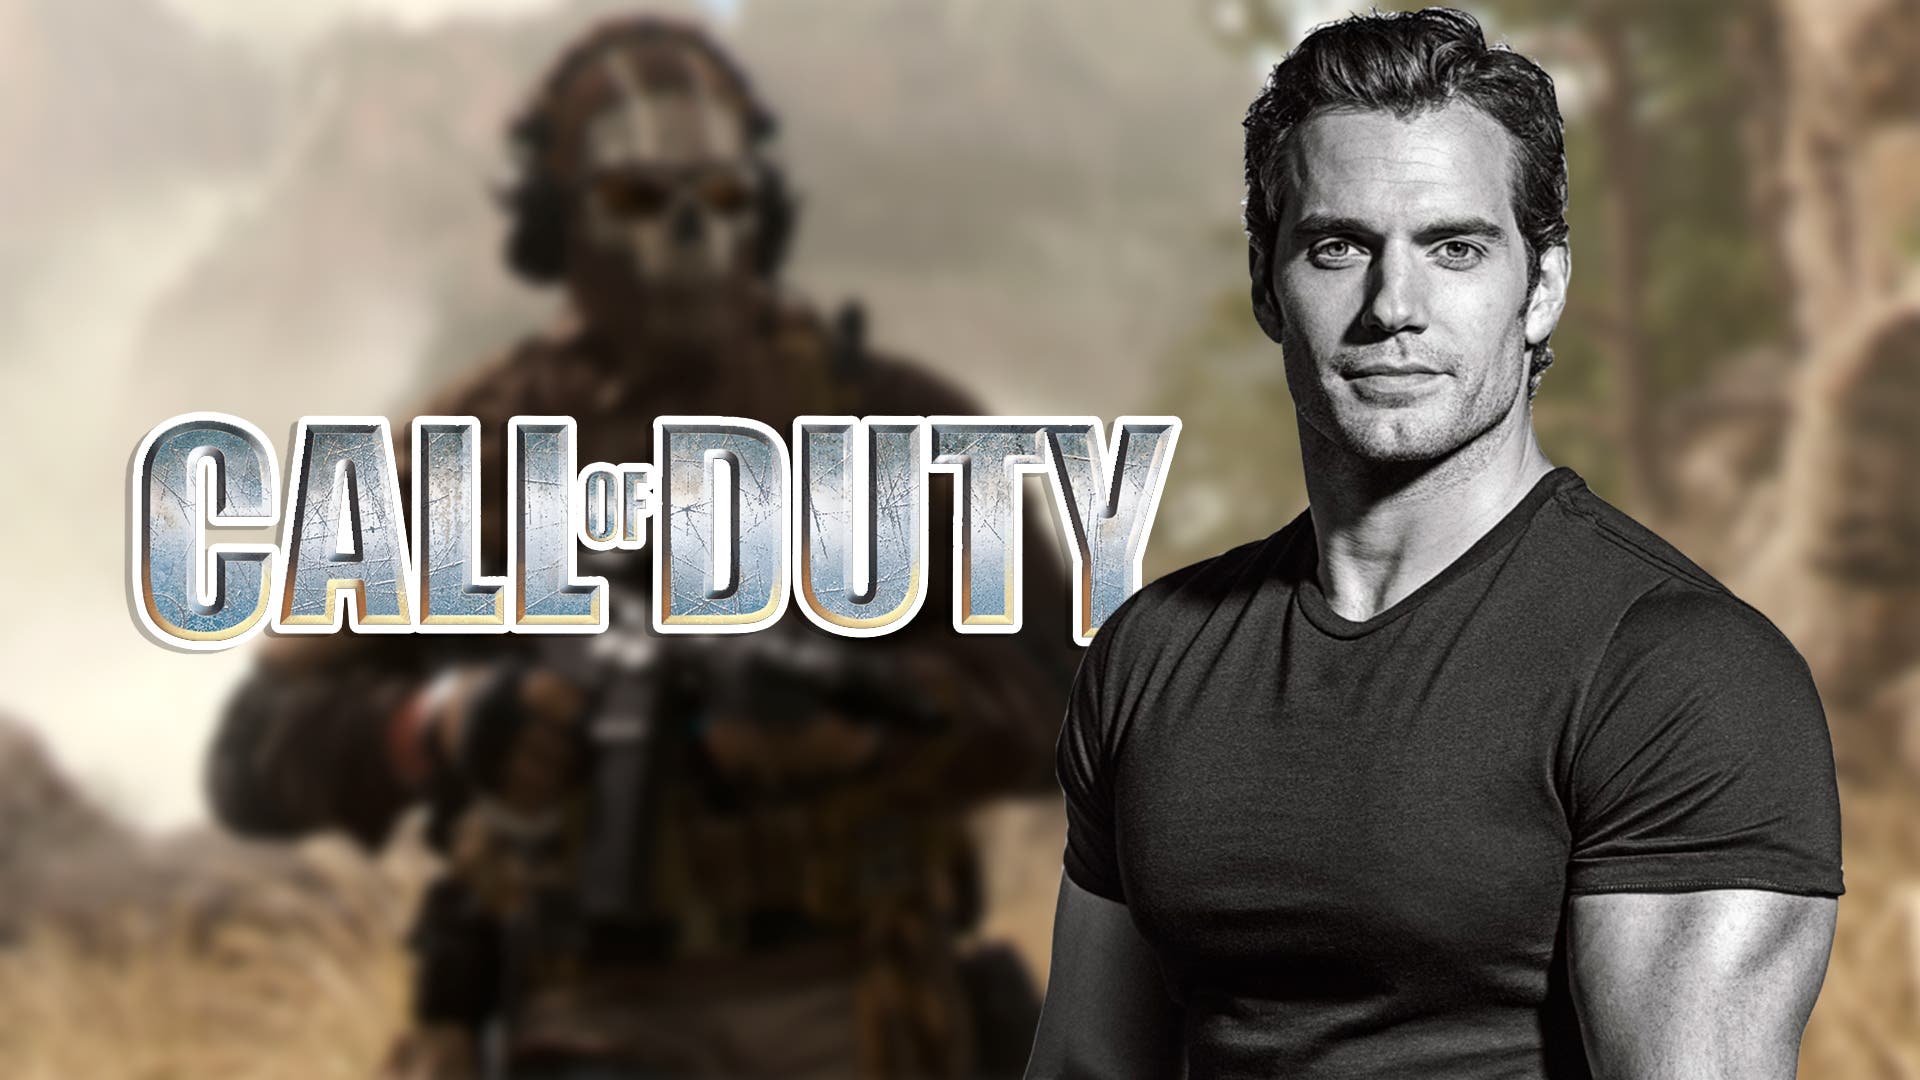 Henry Cavill in the Call of Duty movie and with THIS character?  Give me three!